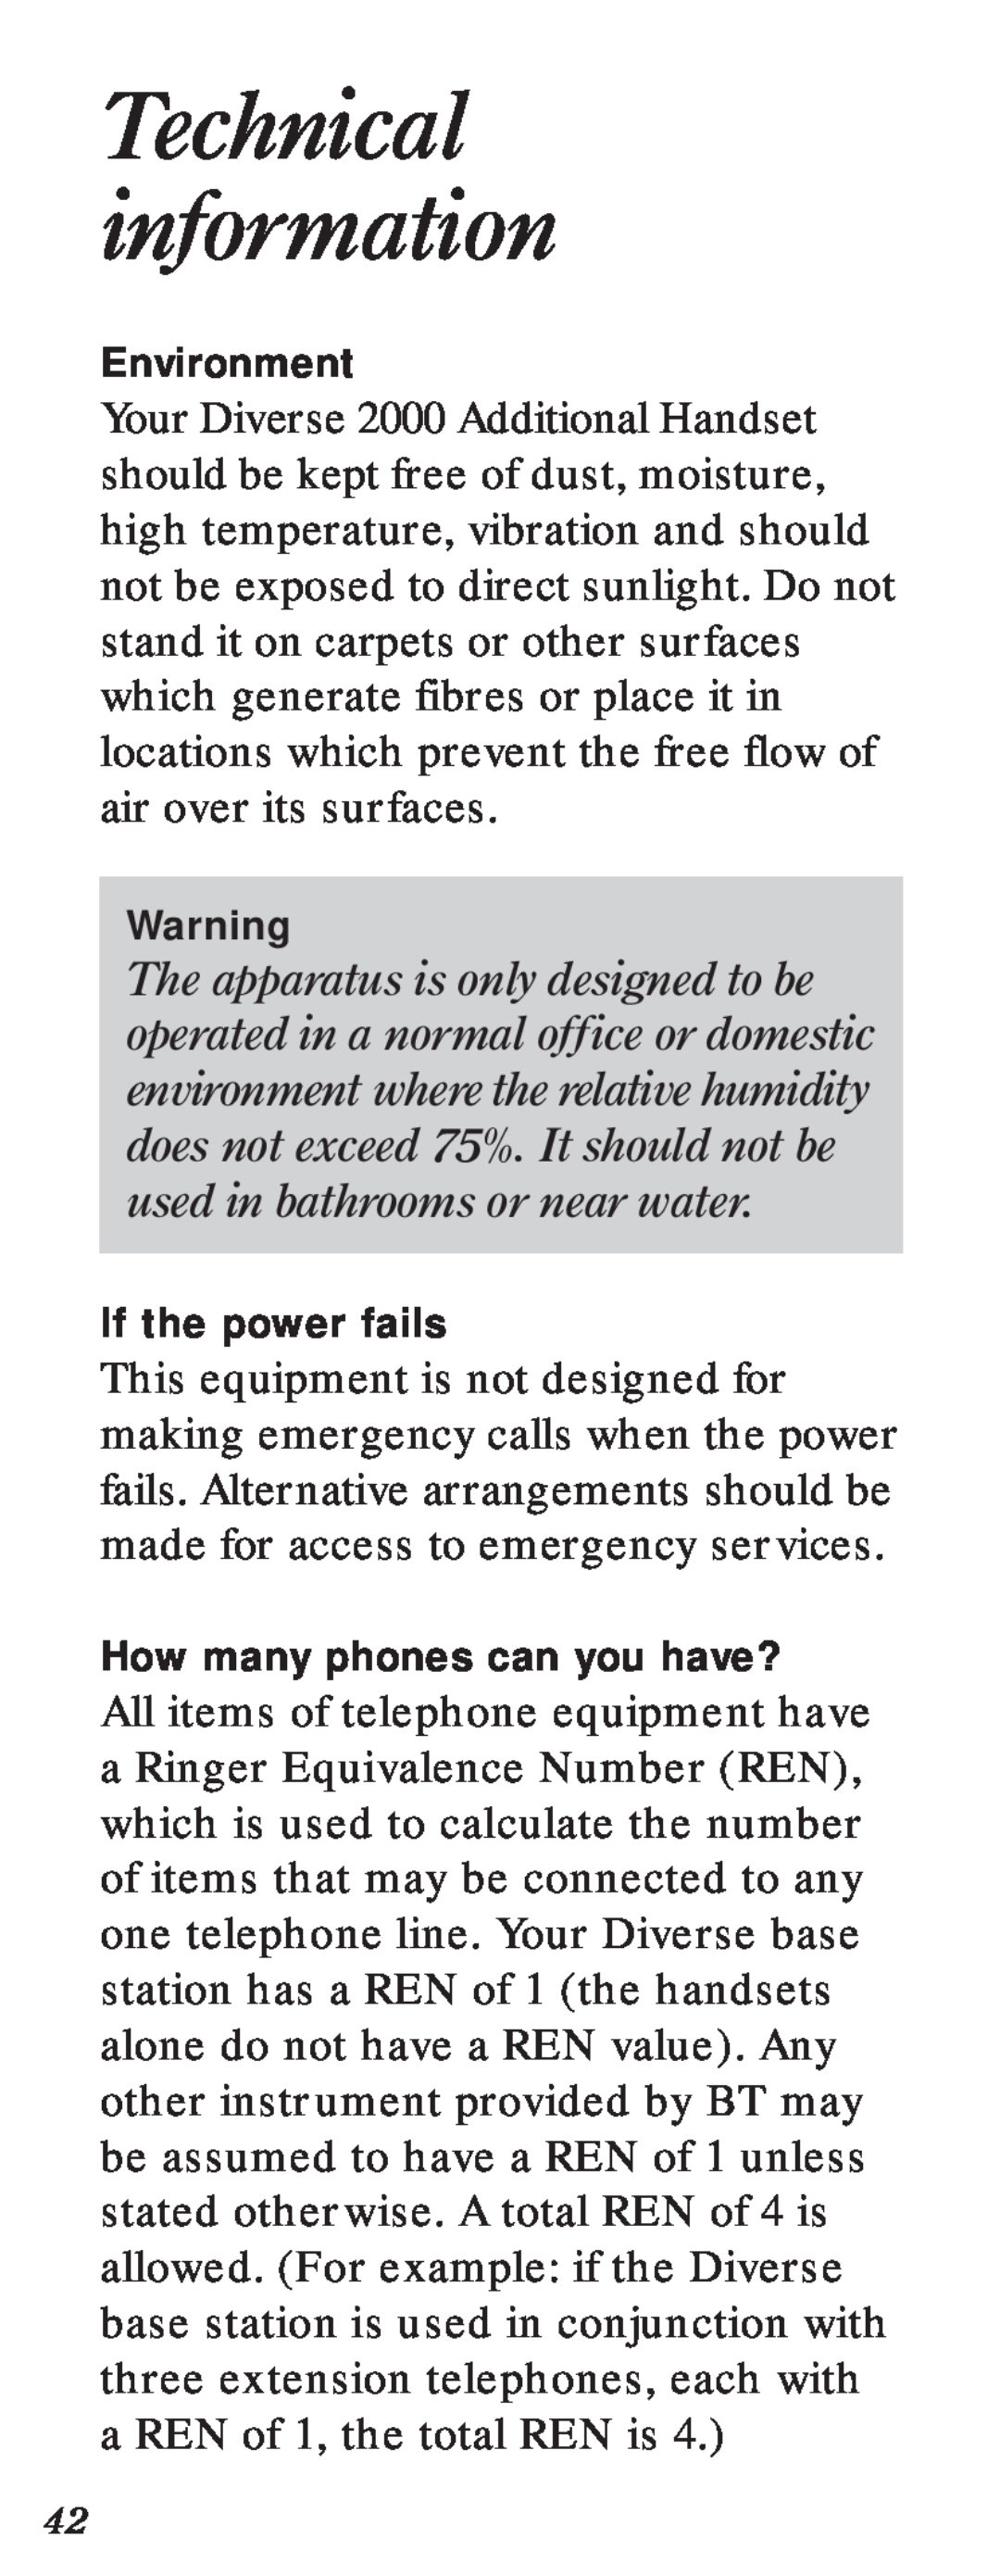 BT 2000 user manual Technical information, Environment, If the power fails, How many phones can you have? 